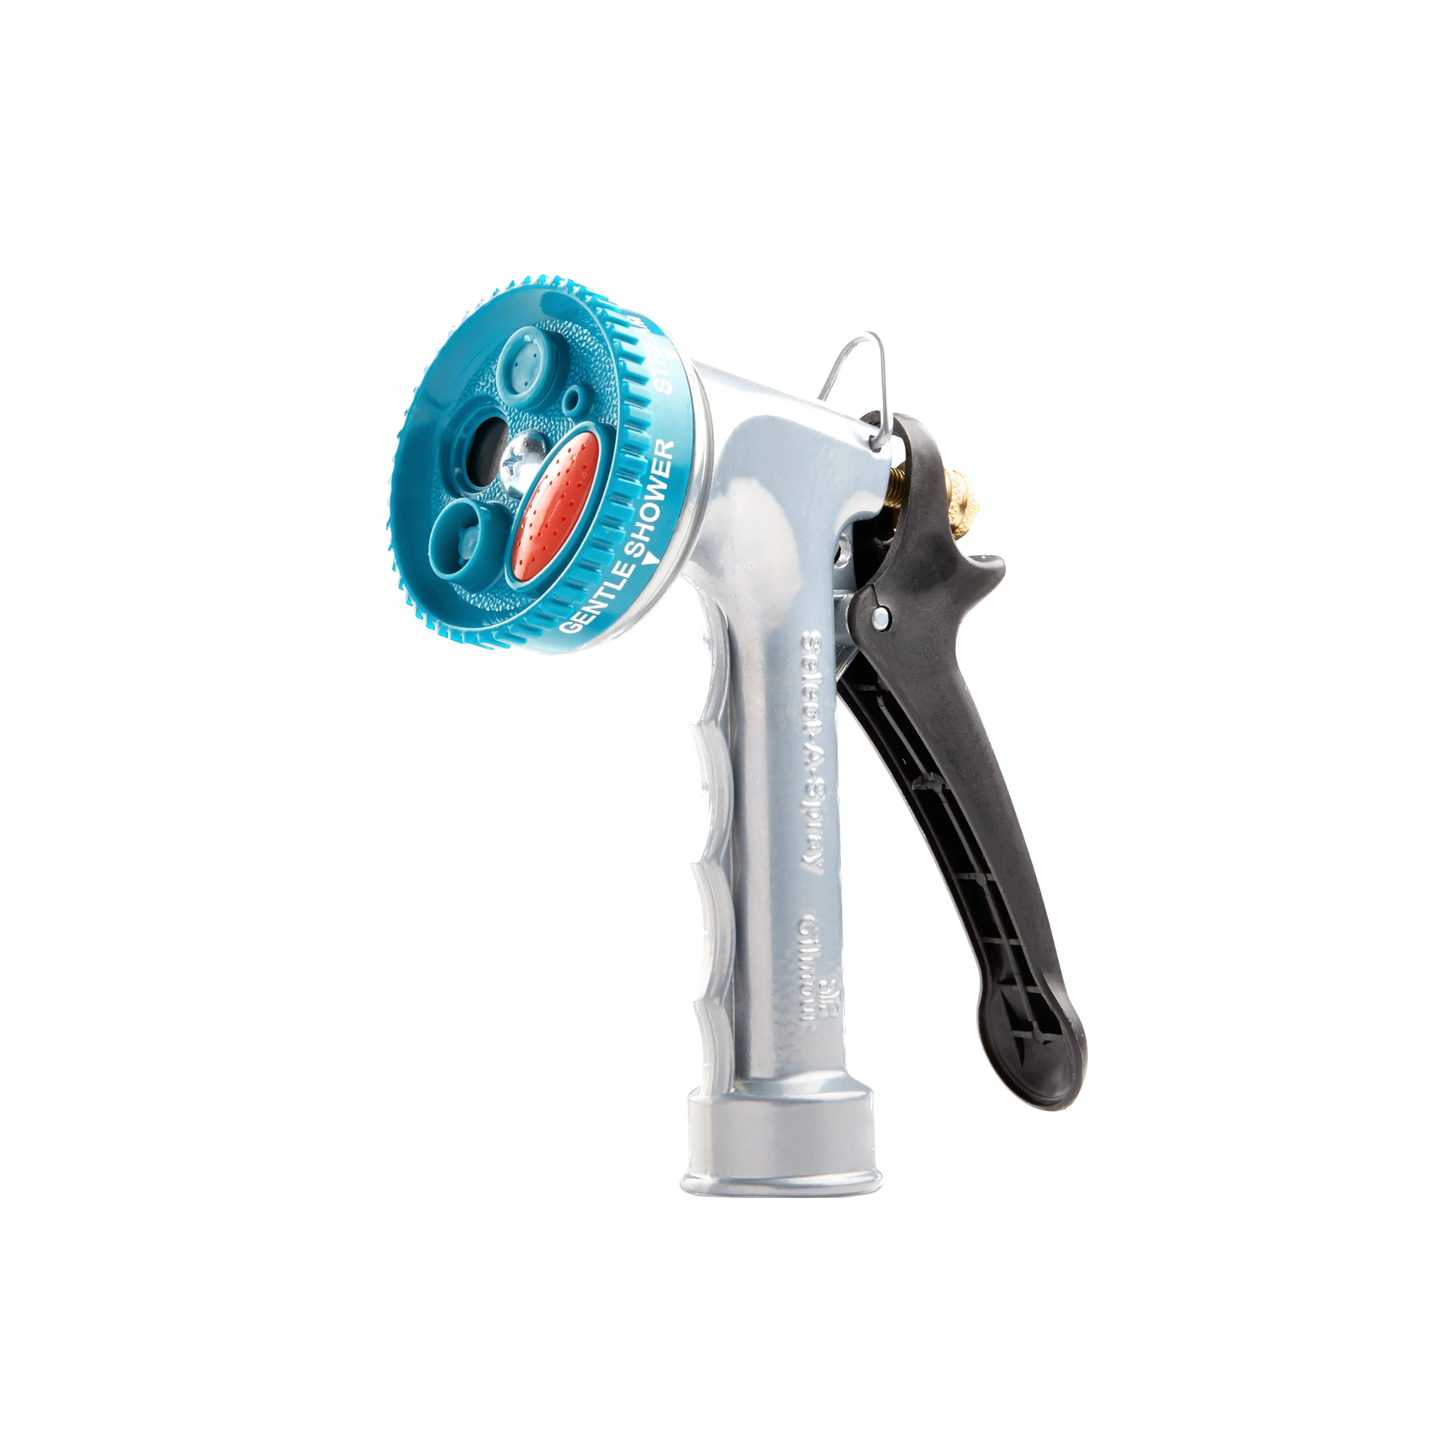 7-Pattern Select-A-Spray Nozzle